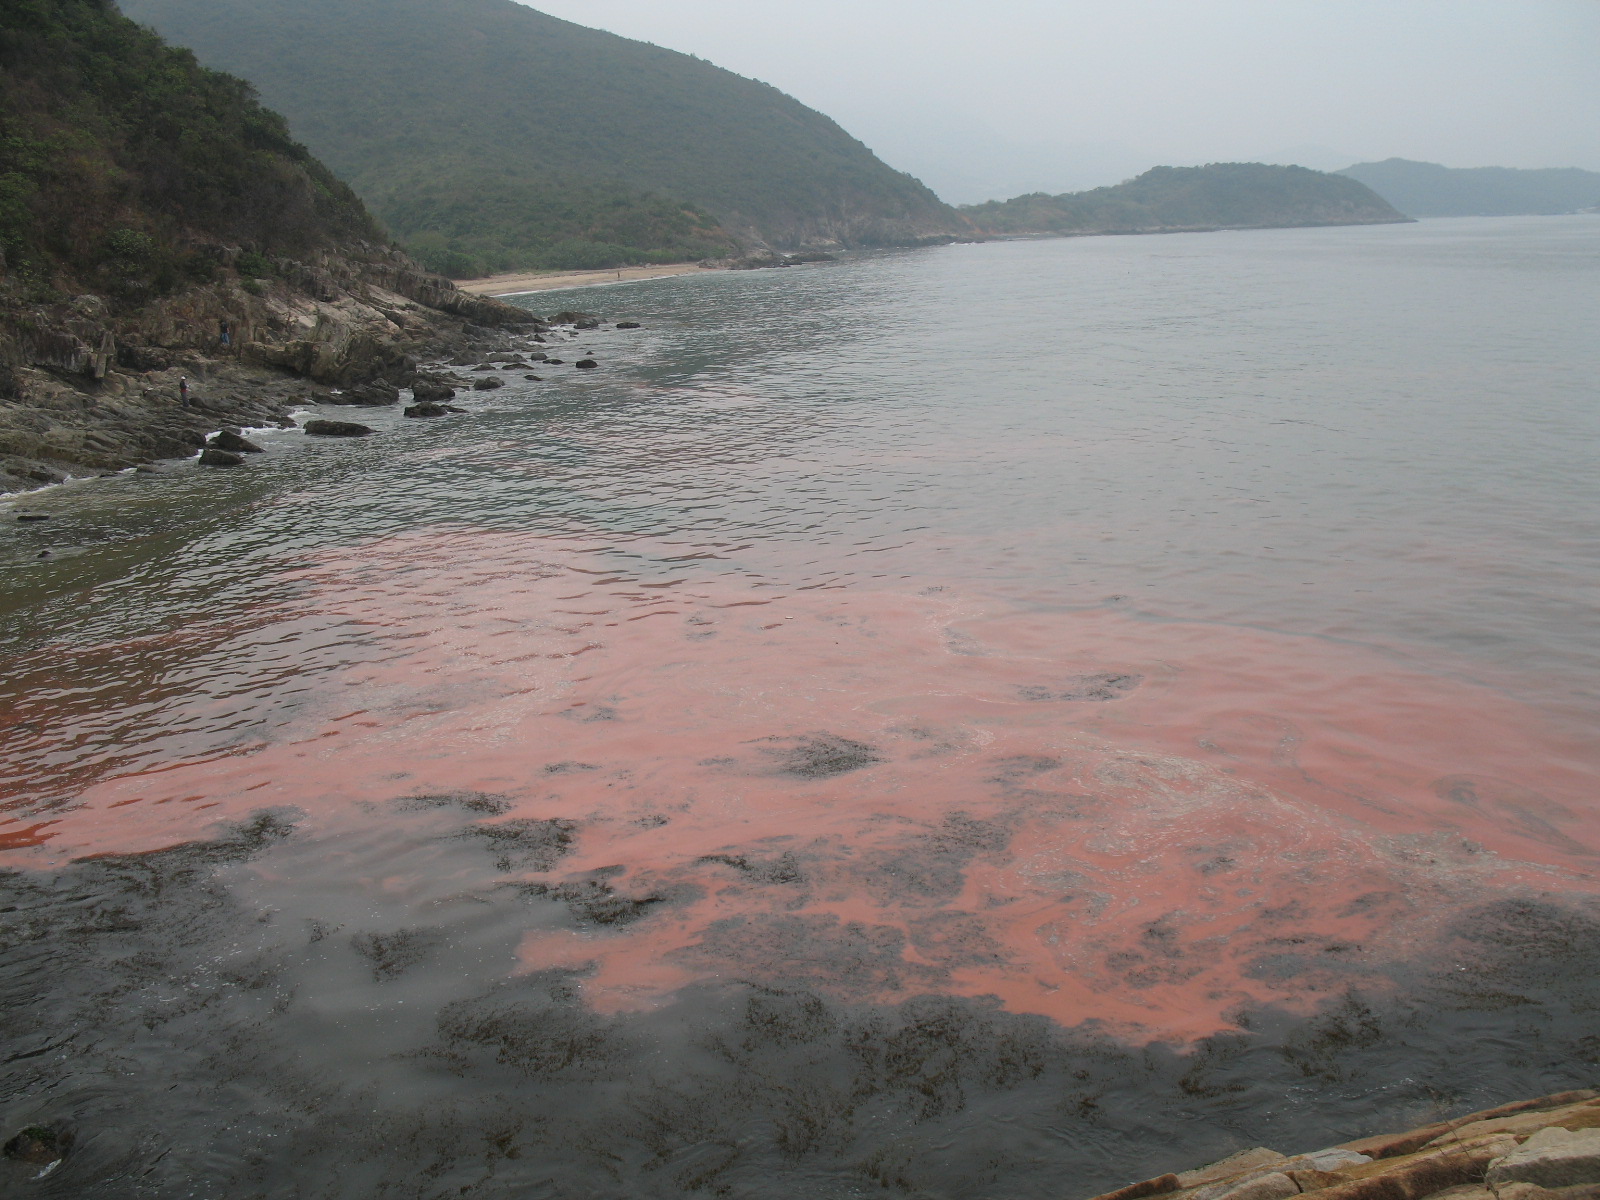 Red tides caused by dinoflagellates